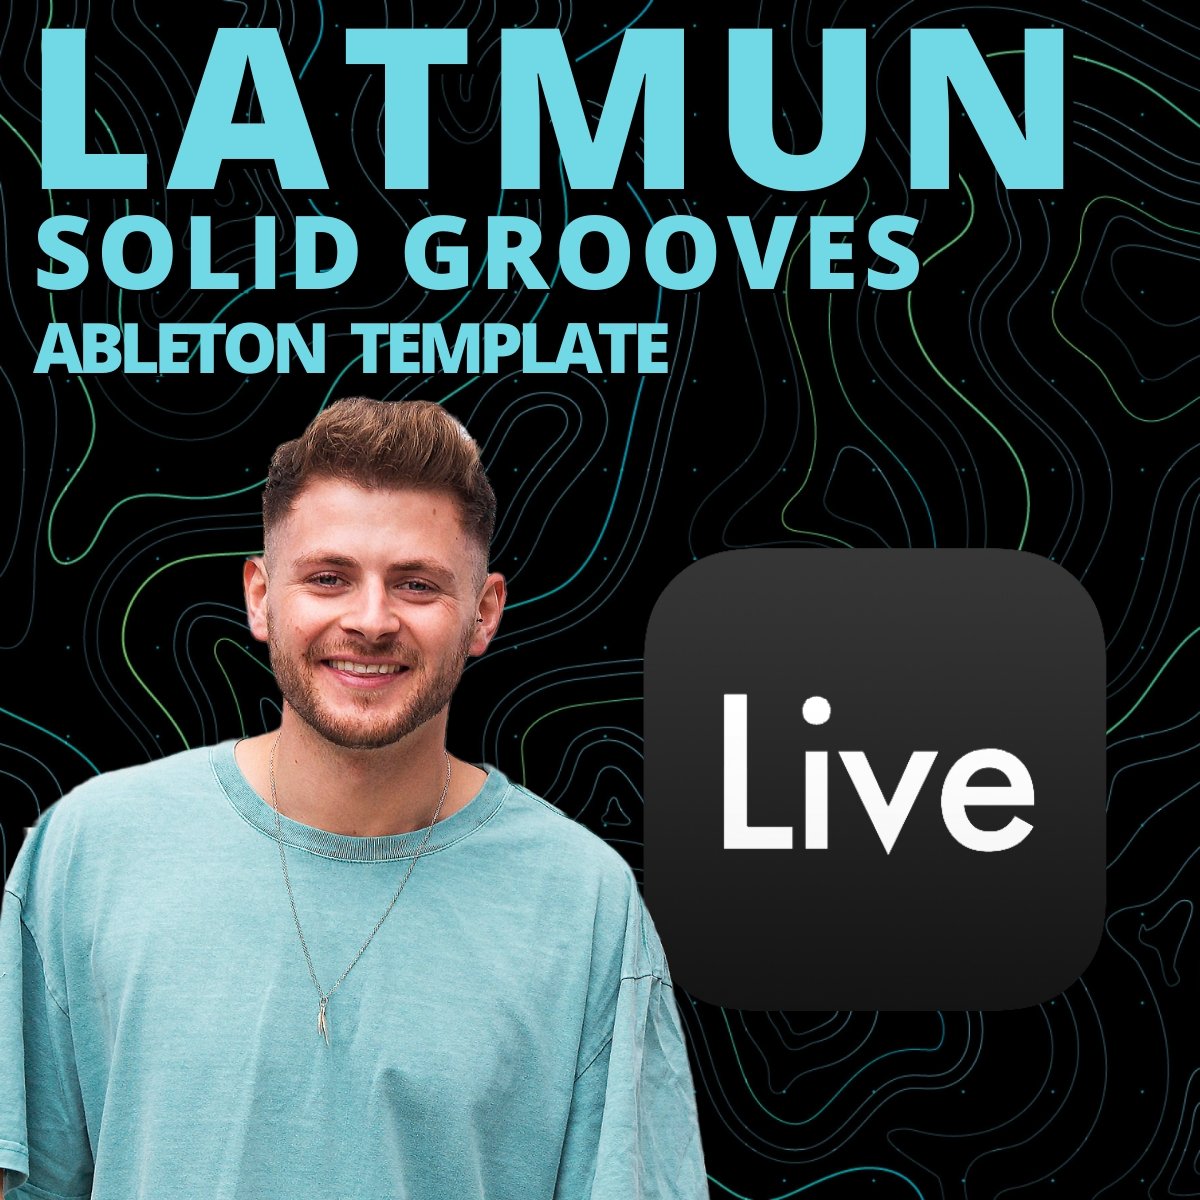 Latmun - Solid Grooves / Minimal-Tech House - Unconventional - Scraps Audio